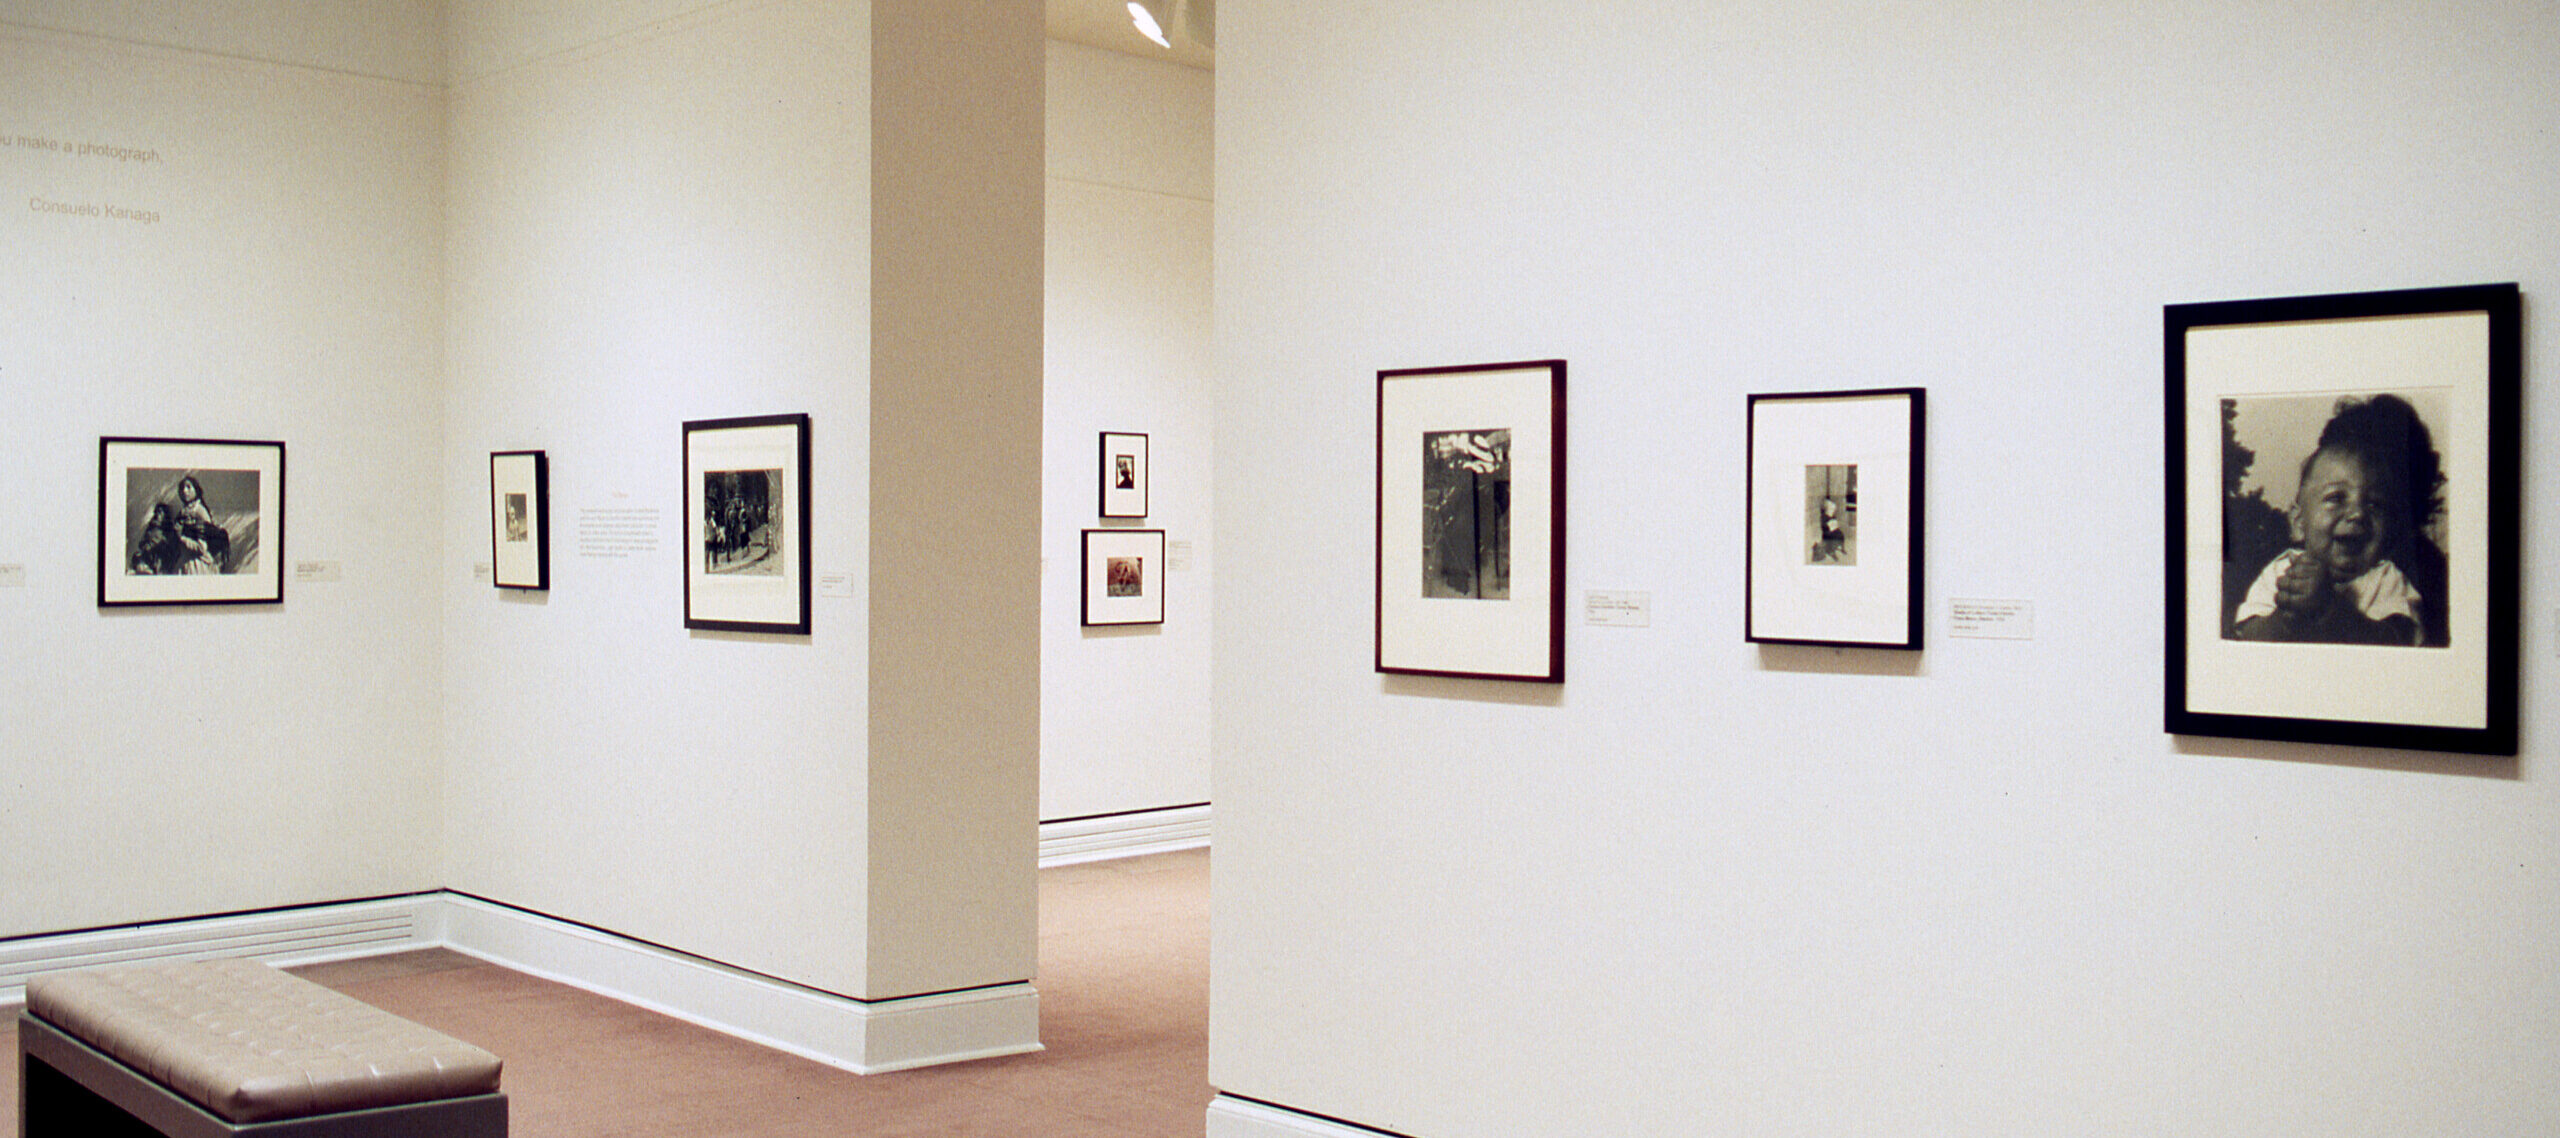 Several black and white photographs hanging on a white gallery wall.